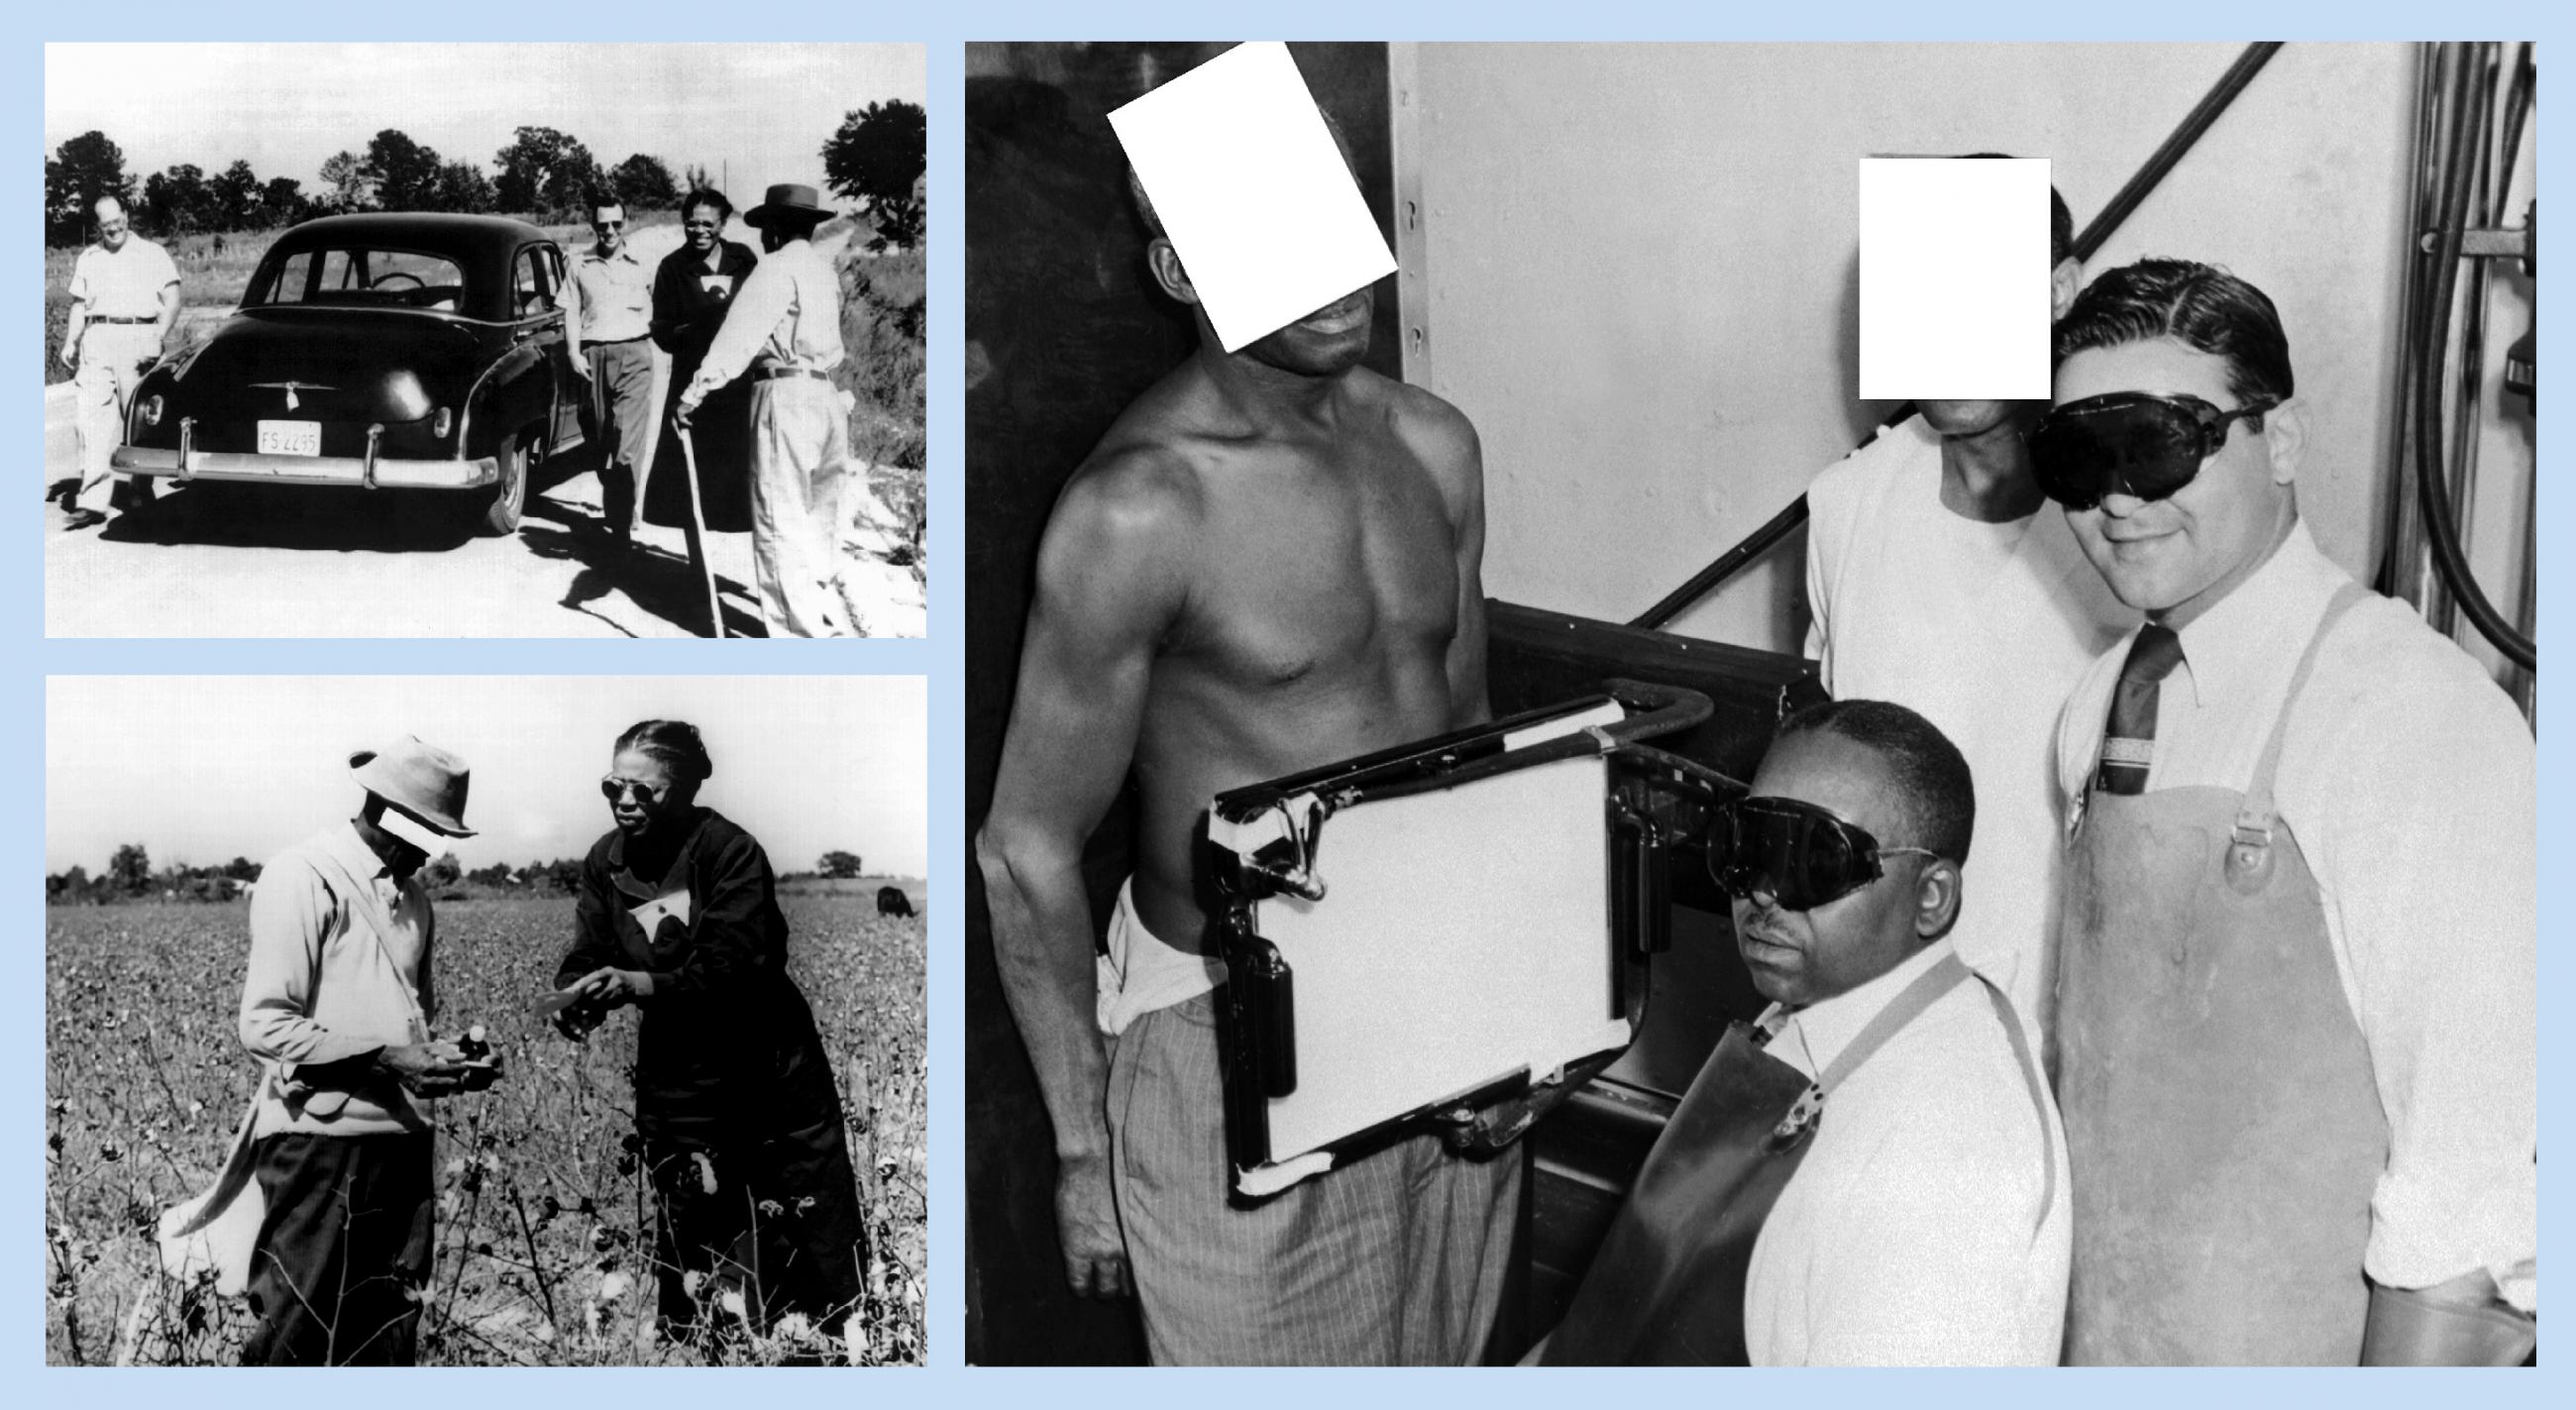 The photos shows health workers and trial participants. In one photo a man behind an X-ray screen whose face has been covered with a square to protect his identity. 